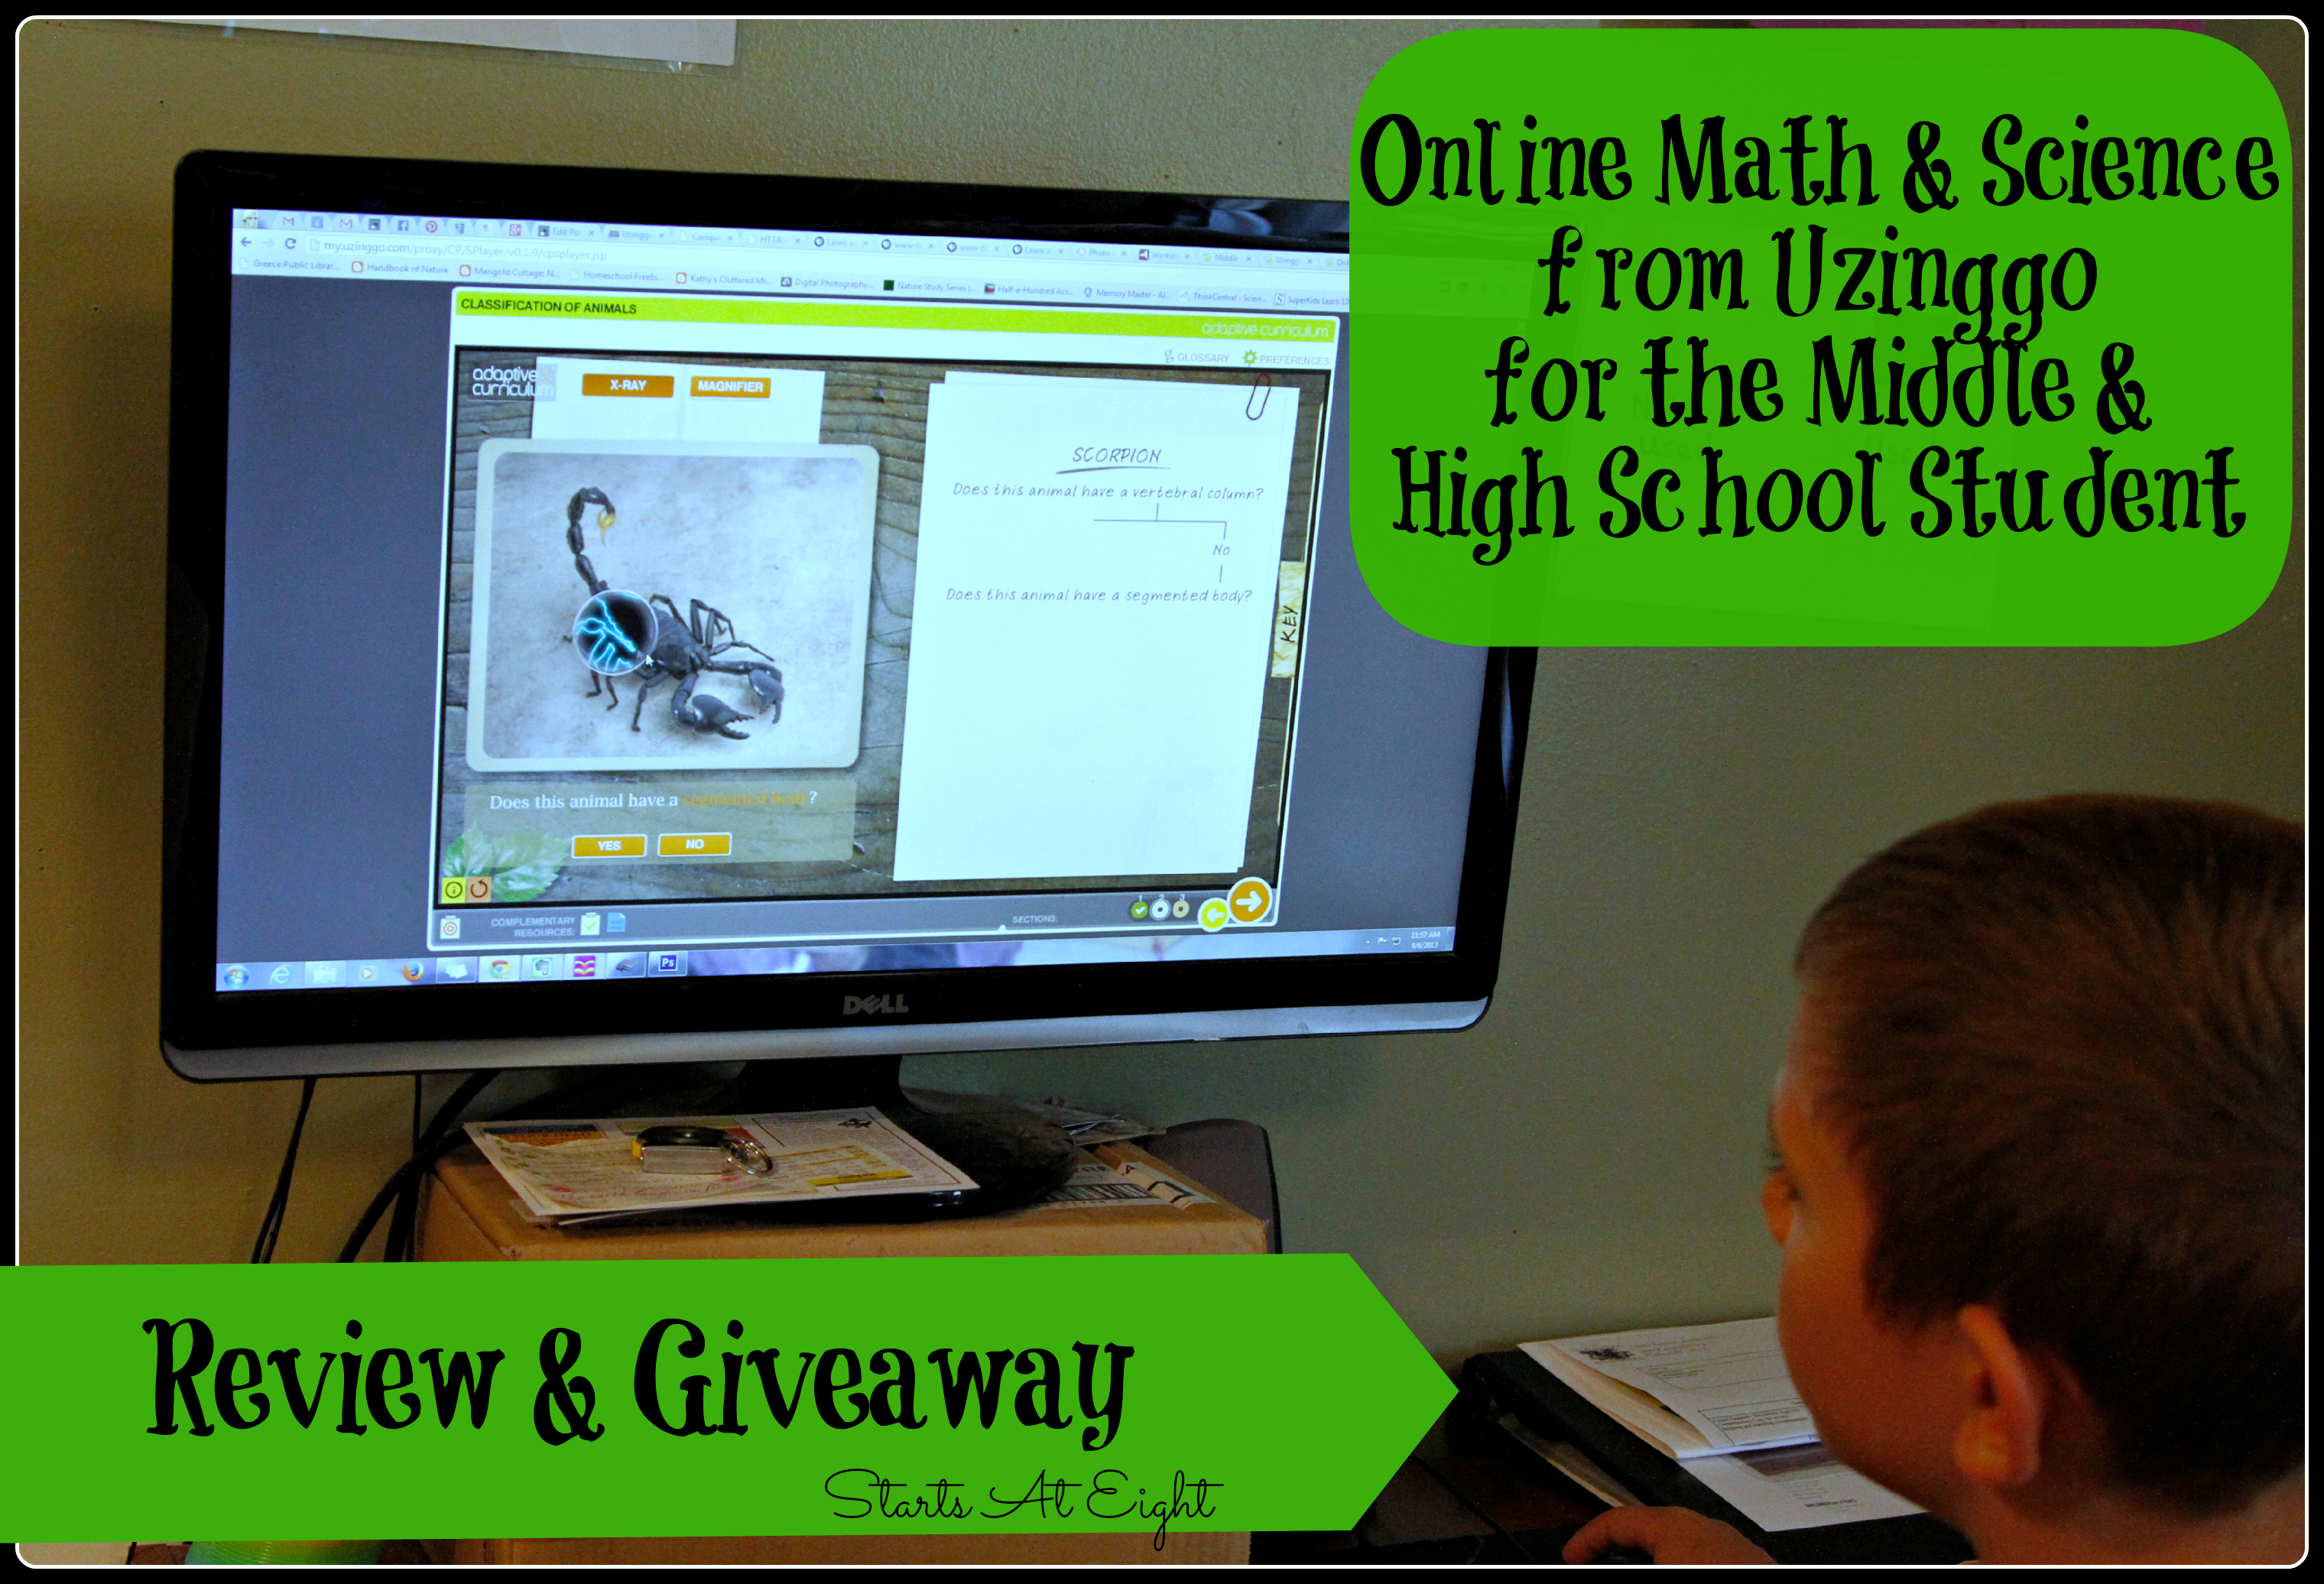 Online Math & Science from Uzinggo for the Middle & High School Student